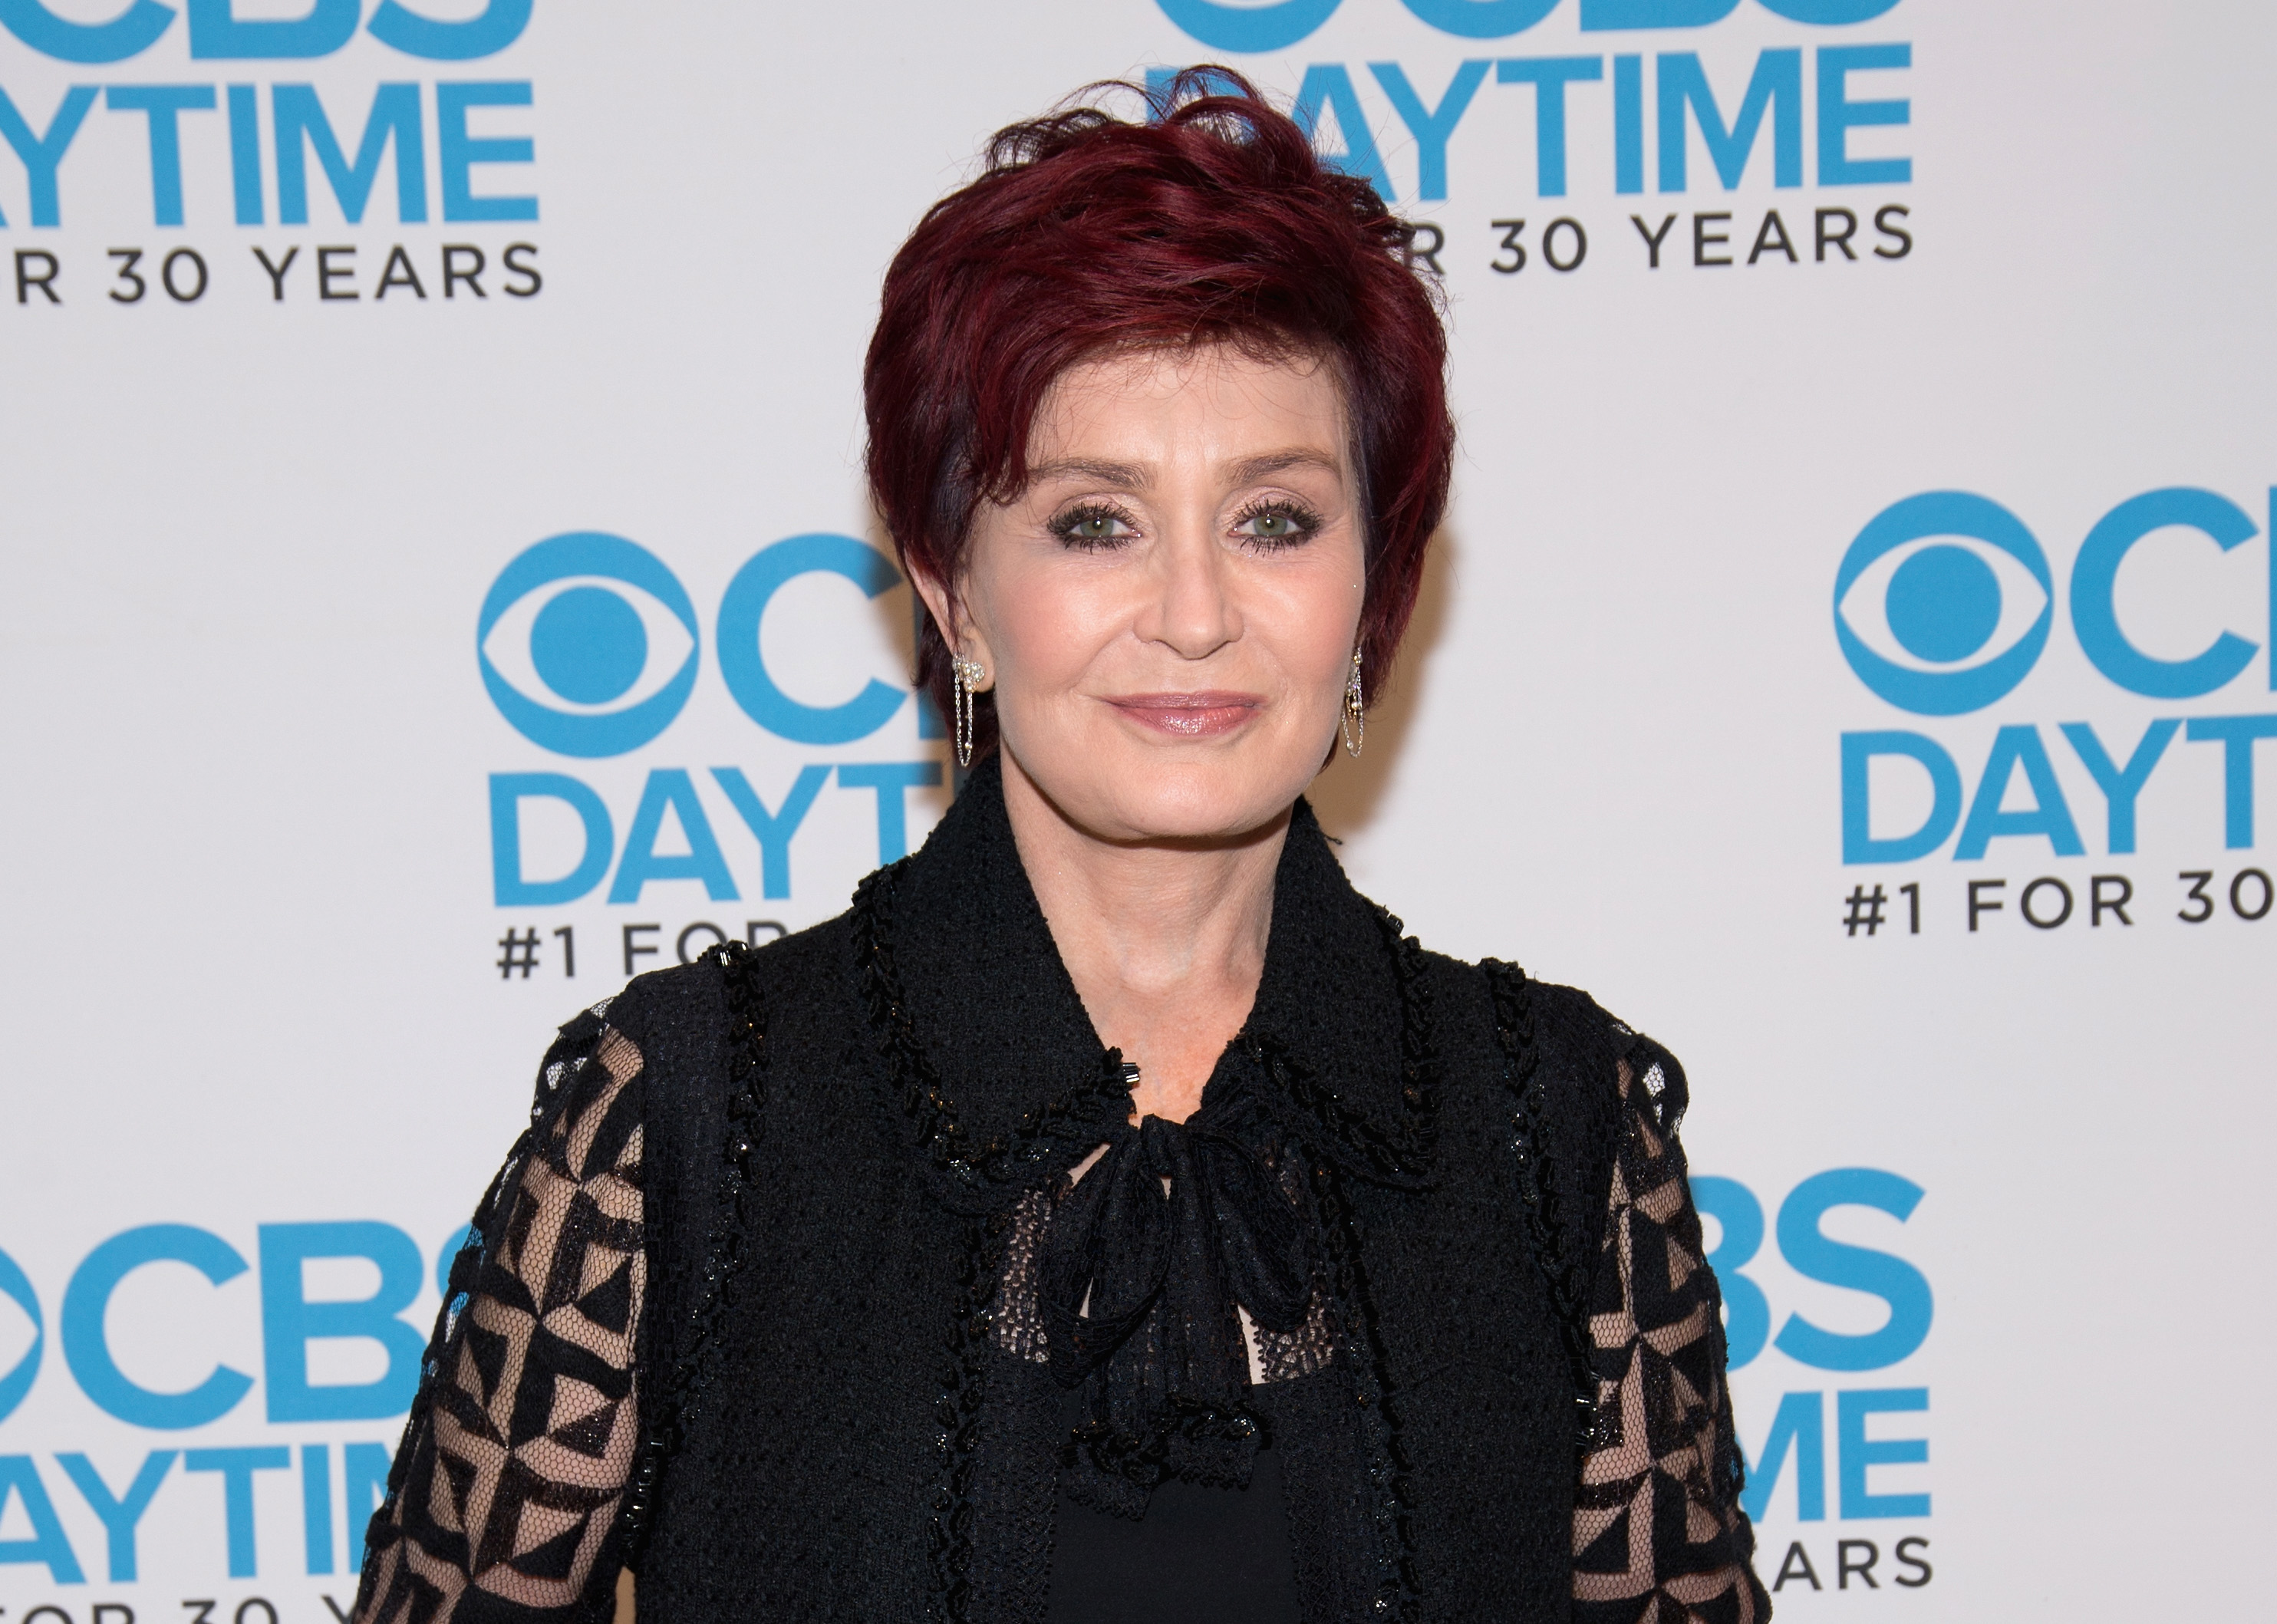 Sharon Osbourne attends CBS Daytime Presents "The Talk" panel at The Paley Center for Media on October 26, 2016 in Beverly Hills, California | Source: Getty Images